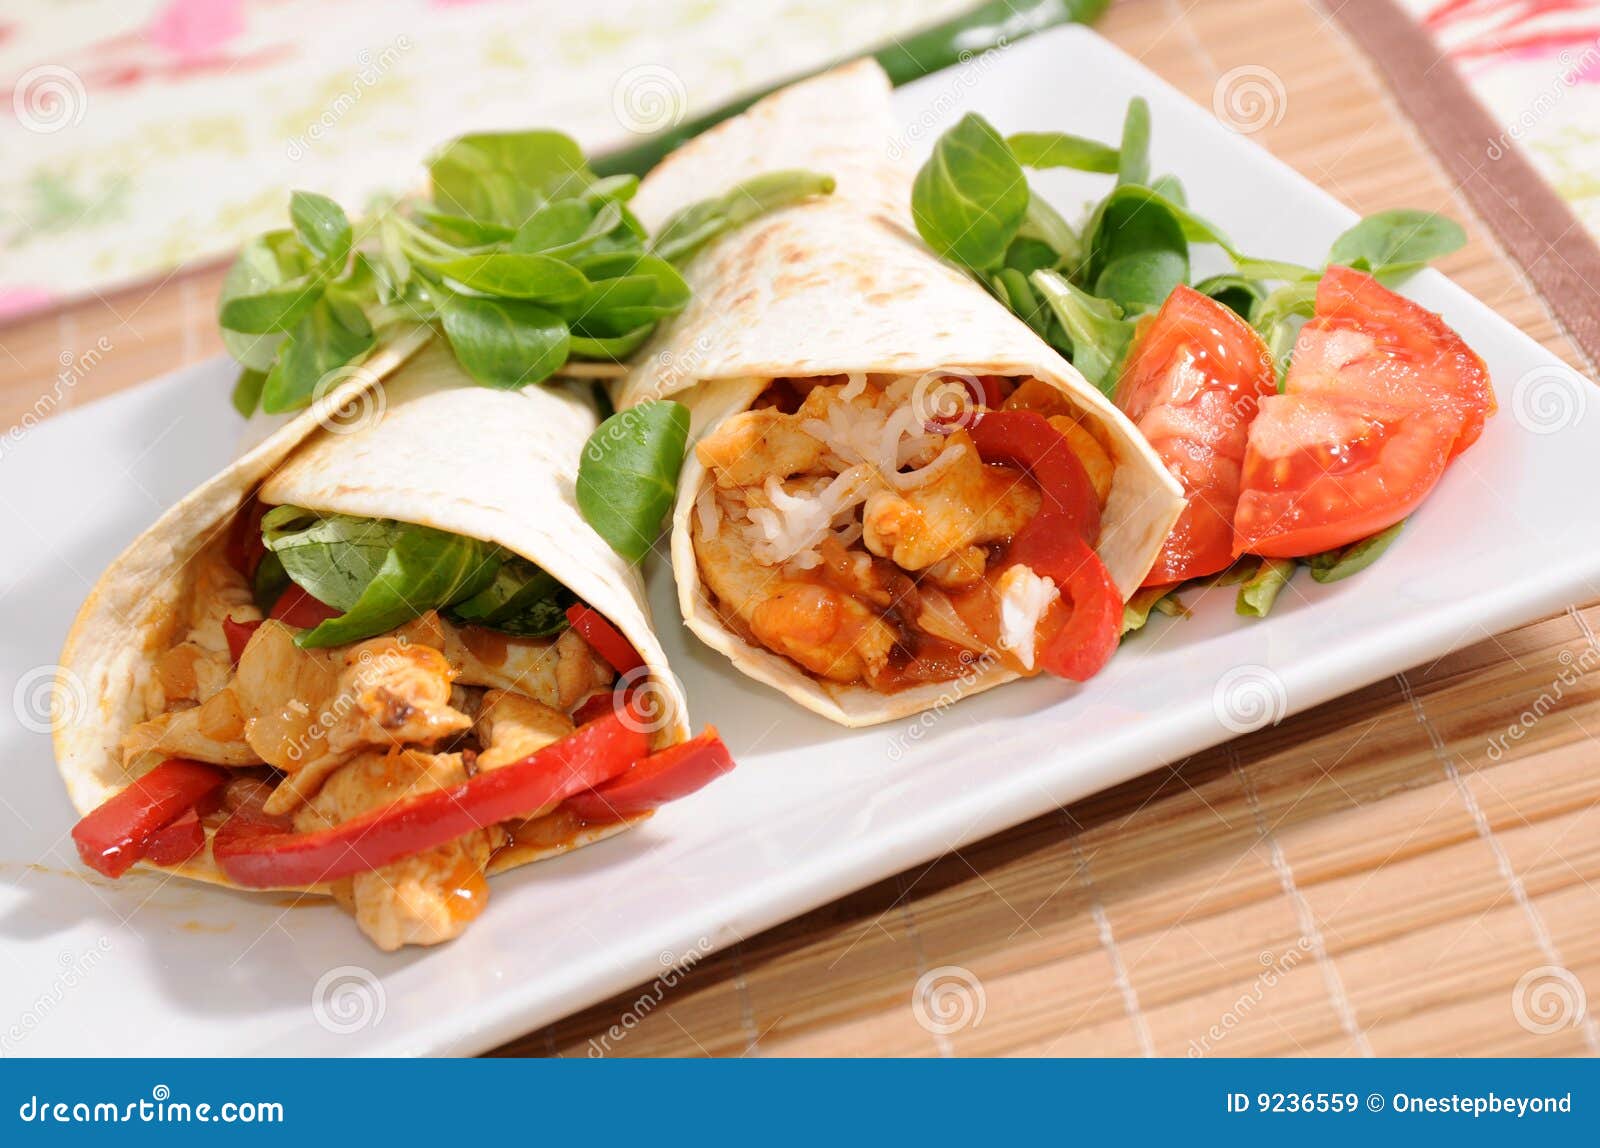 Mexican Food Royalty Free Stock Images - Image: 9236559